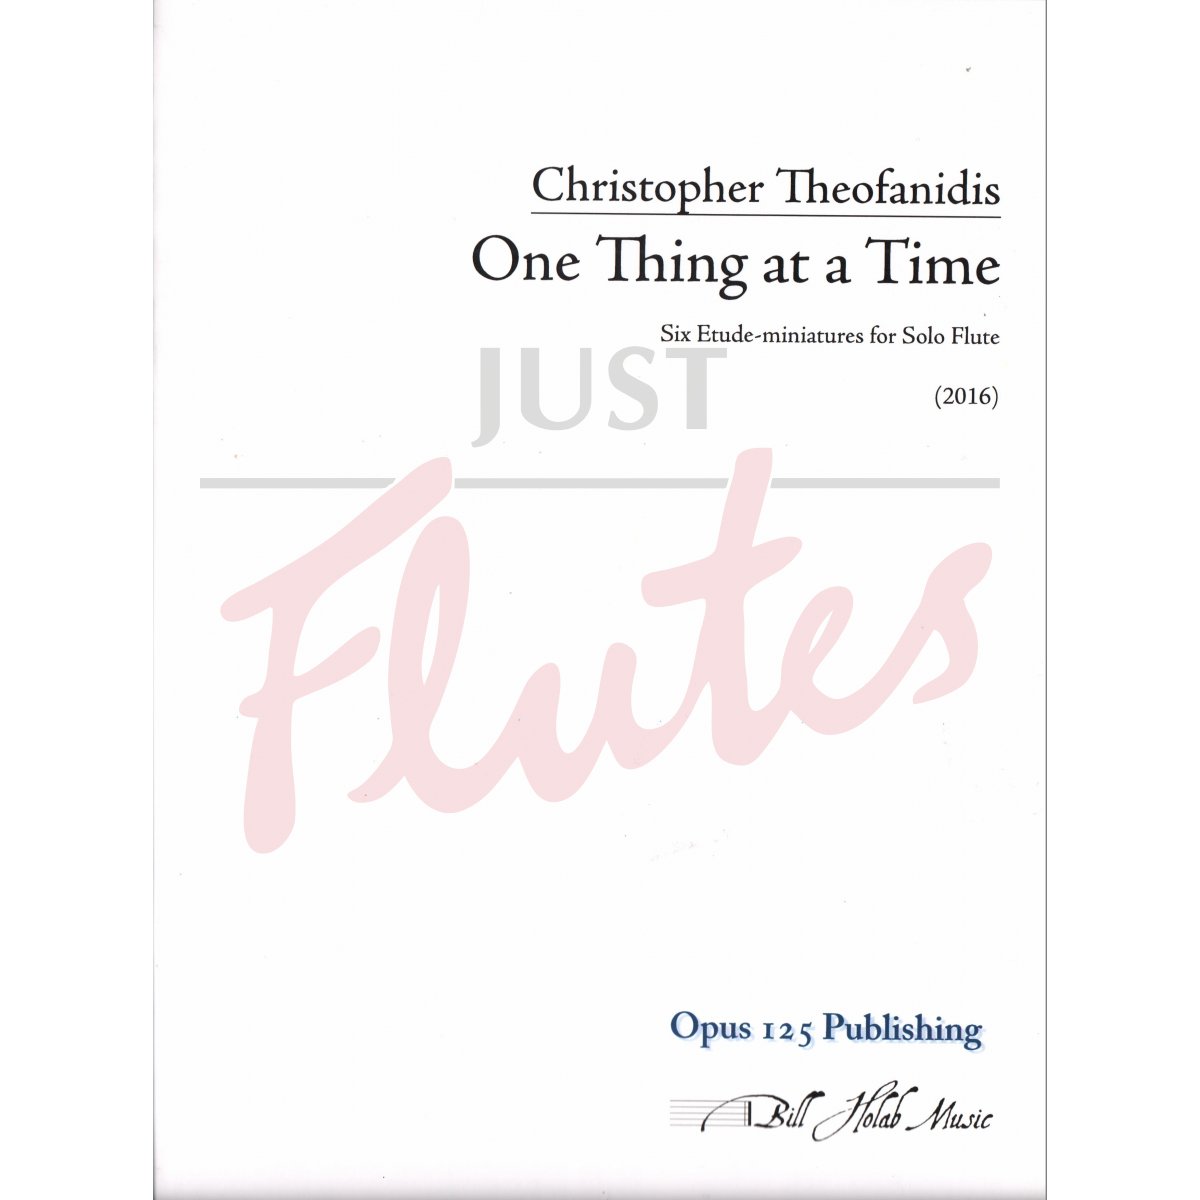 One Thing at a Time: Six Etude-miniatures for Solo Flute